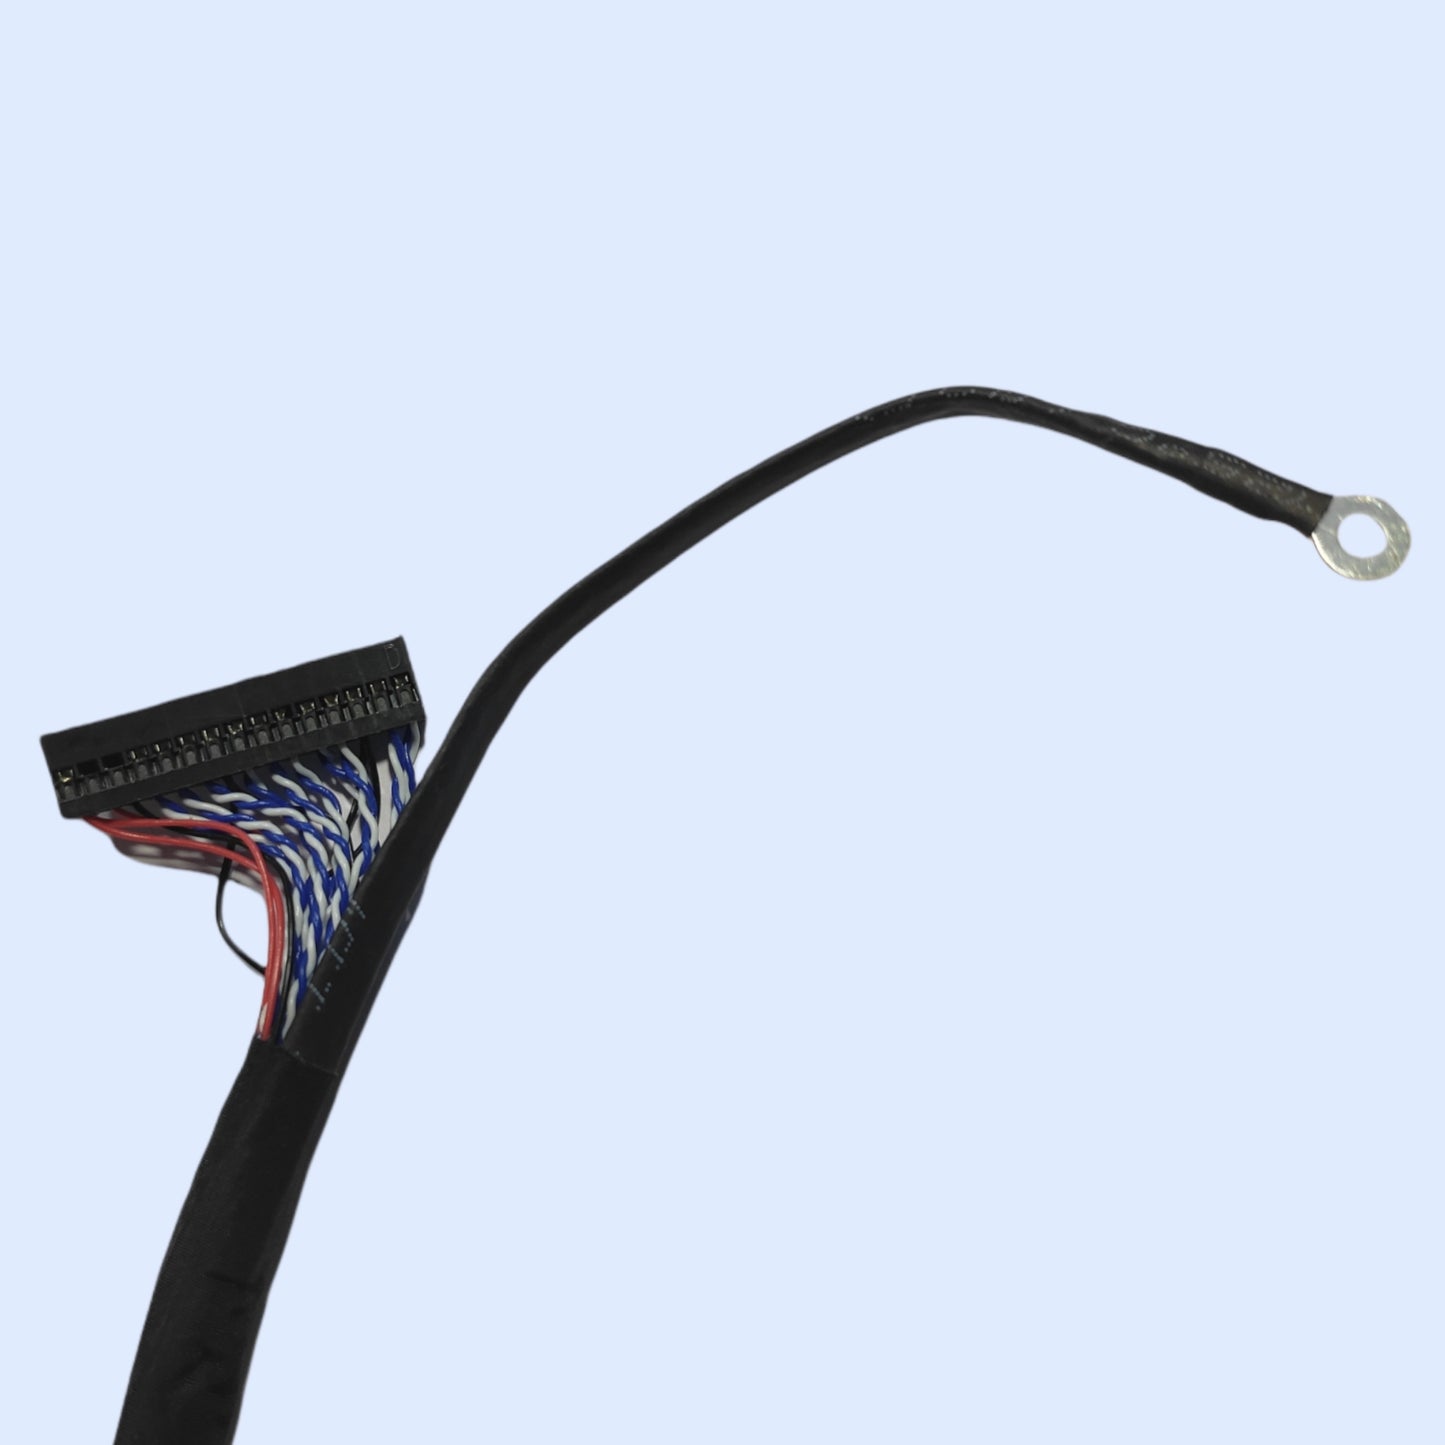 LVDS Cable 05 - Faritha